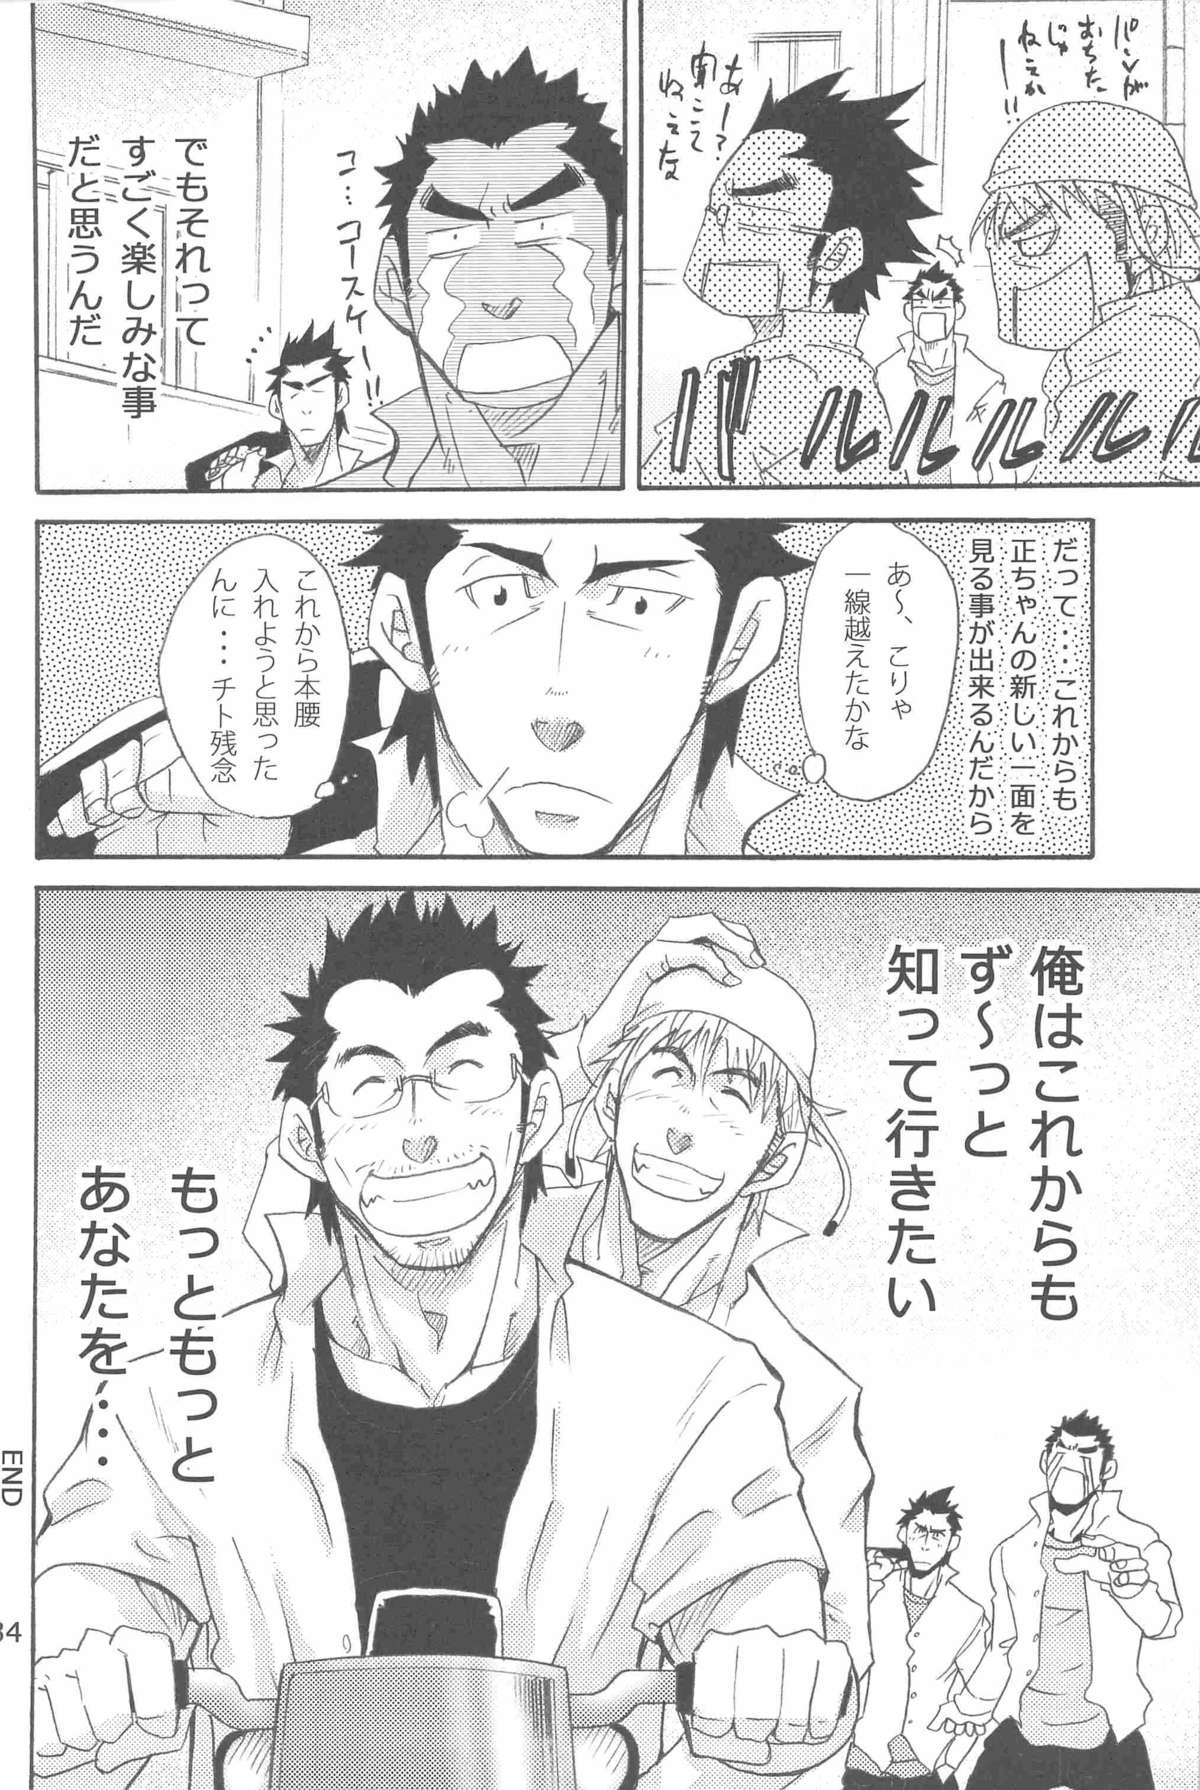 [MATSU Takeshi] More and More of You 5 page 16 full